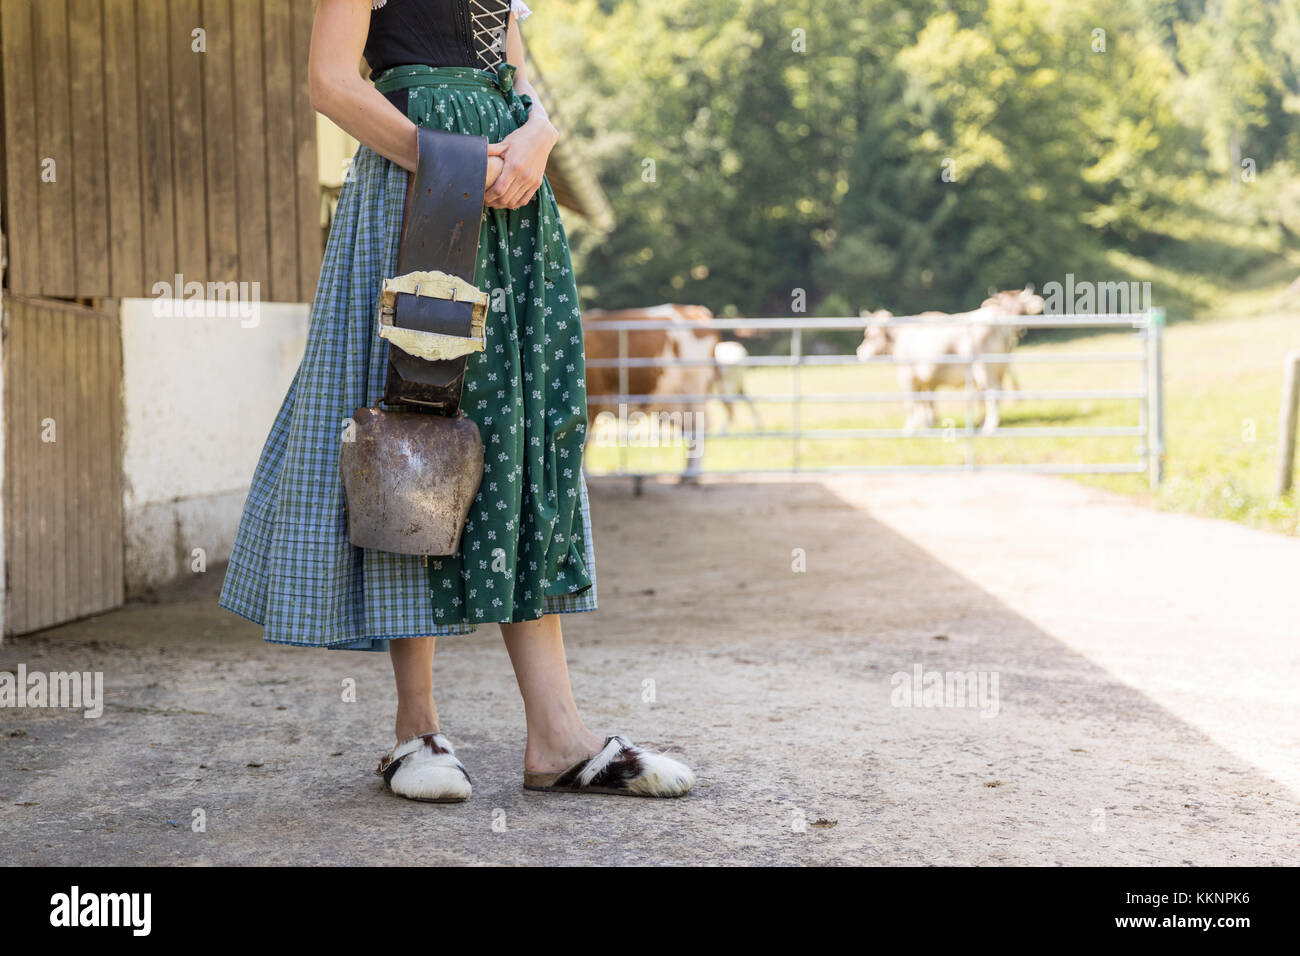 Farmer with dirndl carrying a cowbell Stock Photo